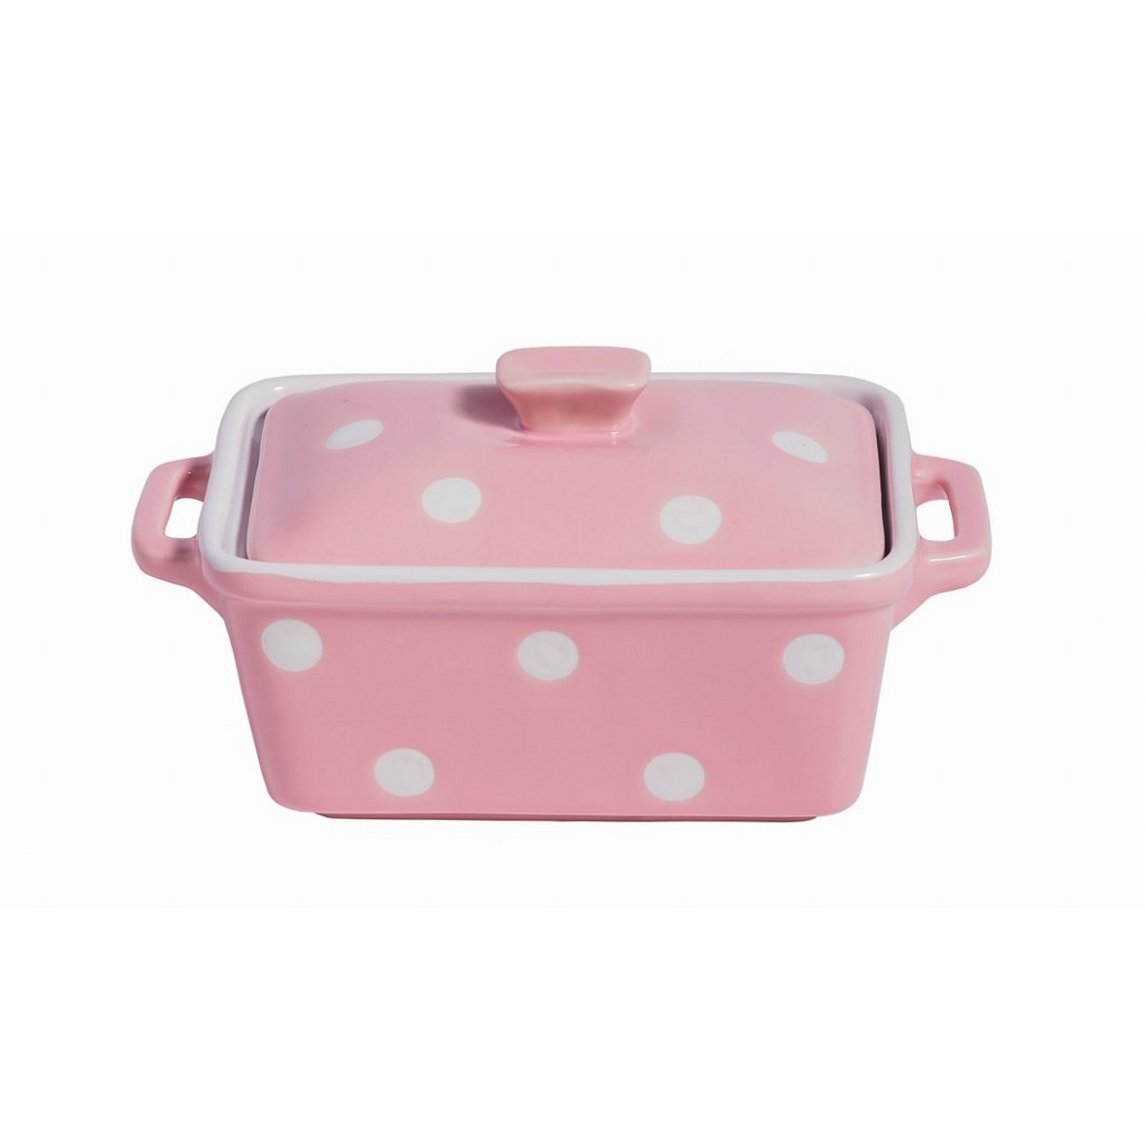 BURRIERA ROSA CON POIS BIANCHI ISABELLE ROSE